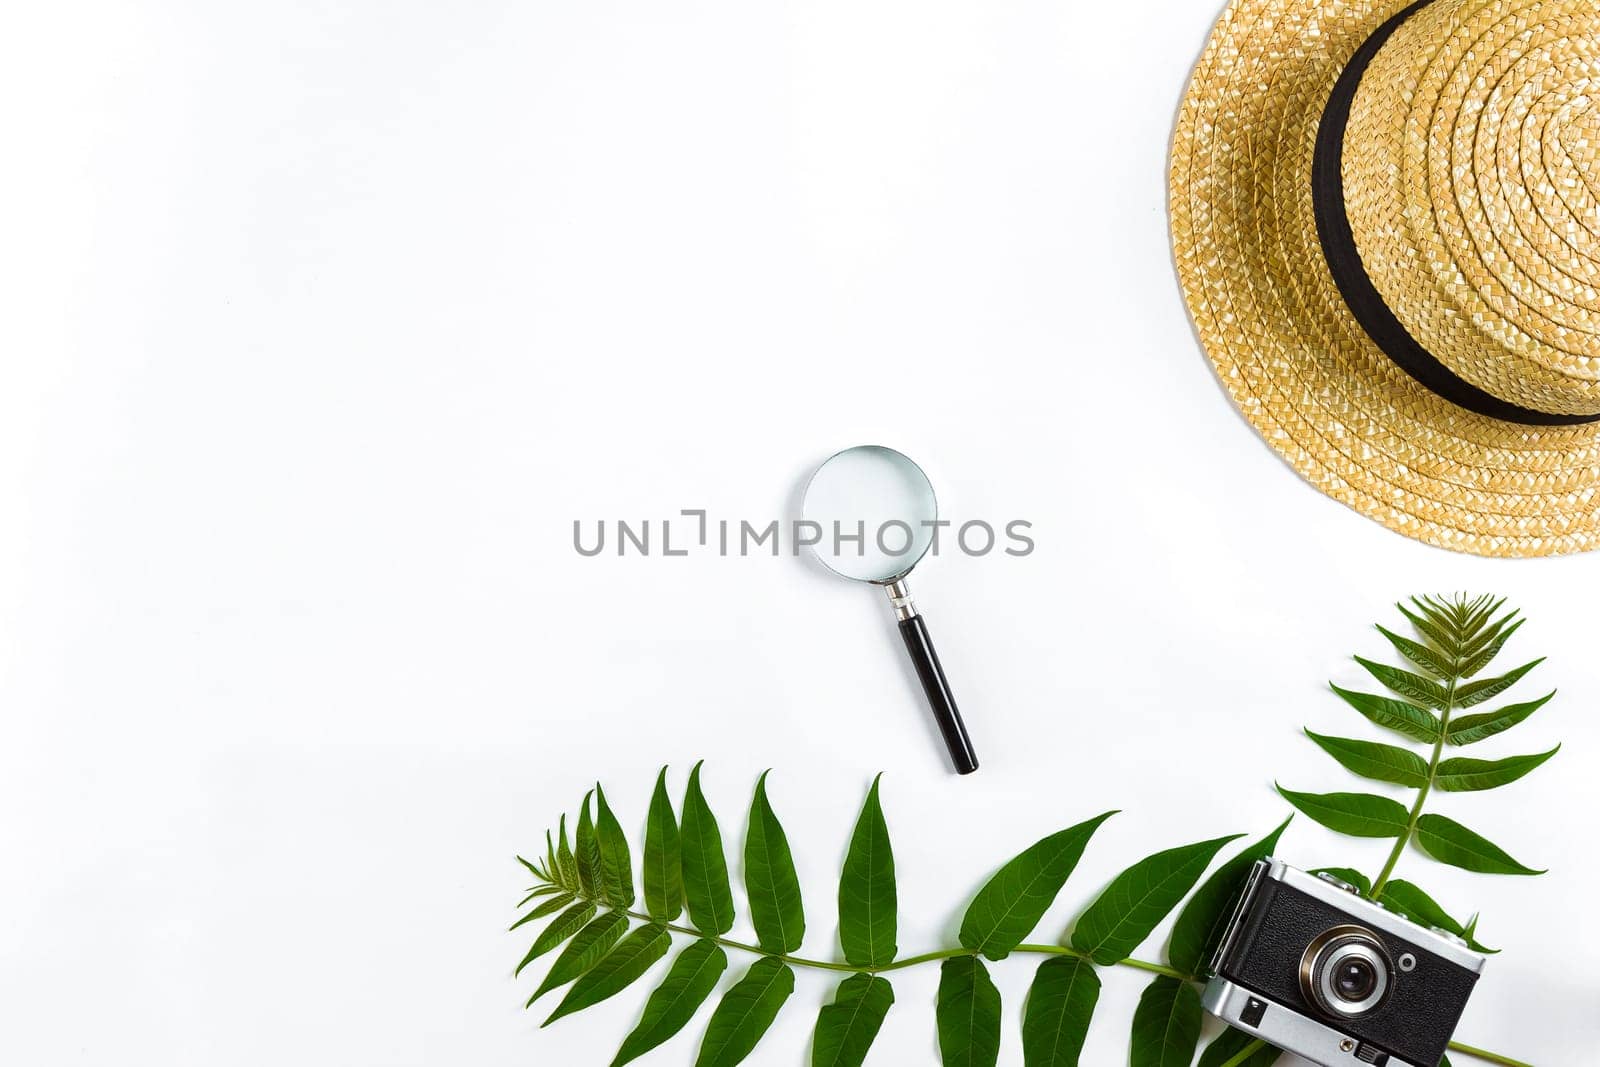 Straw hat with green leaves and old camera on white background, Summer background. Top view. Copy space. Still life. Flat lay